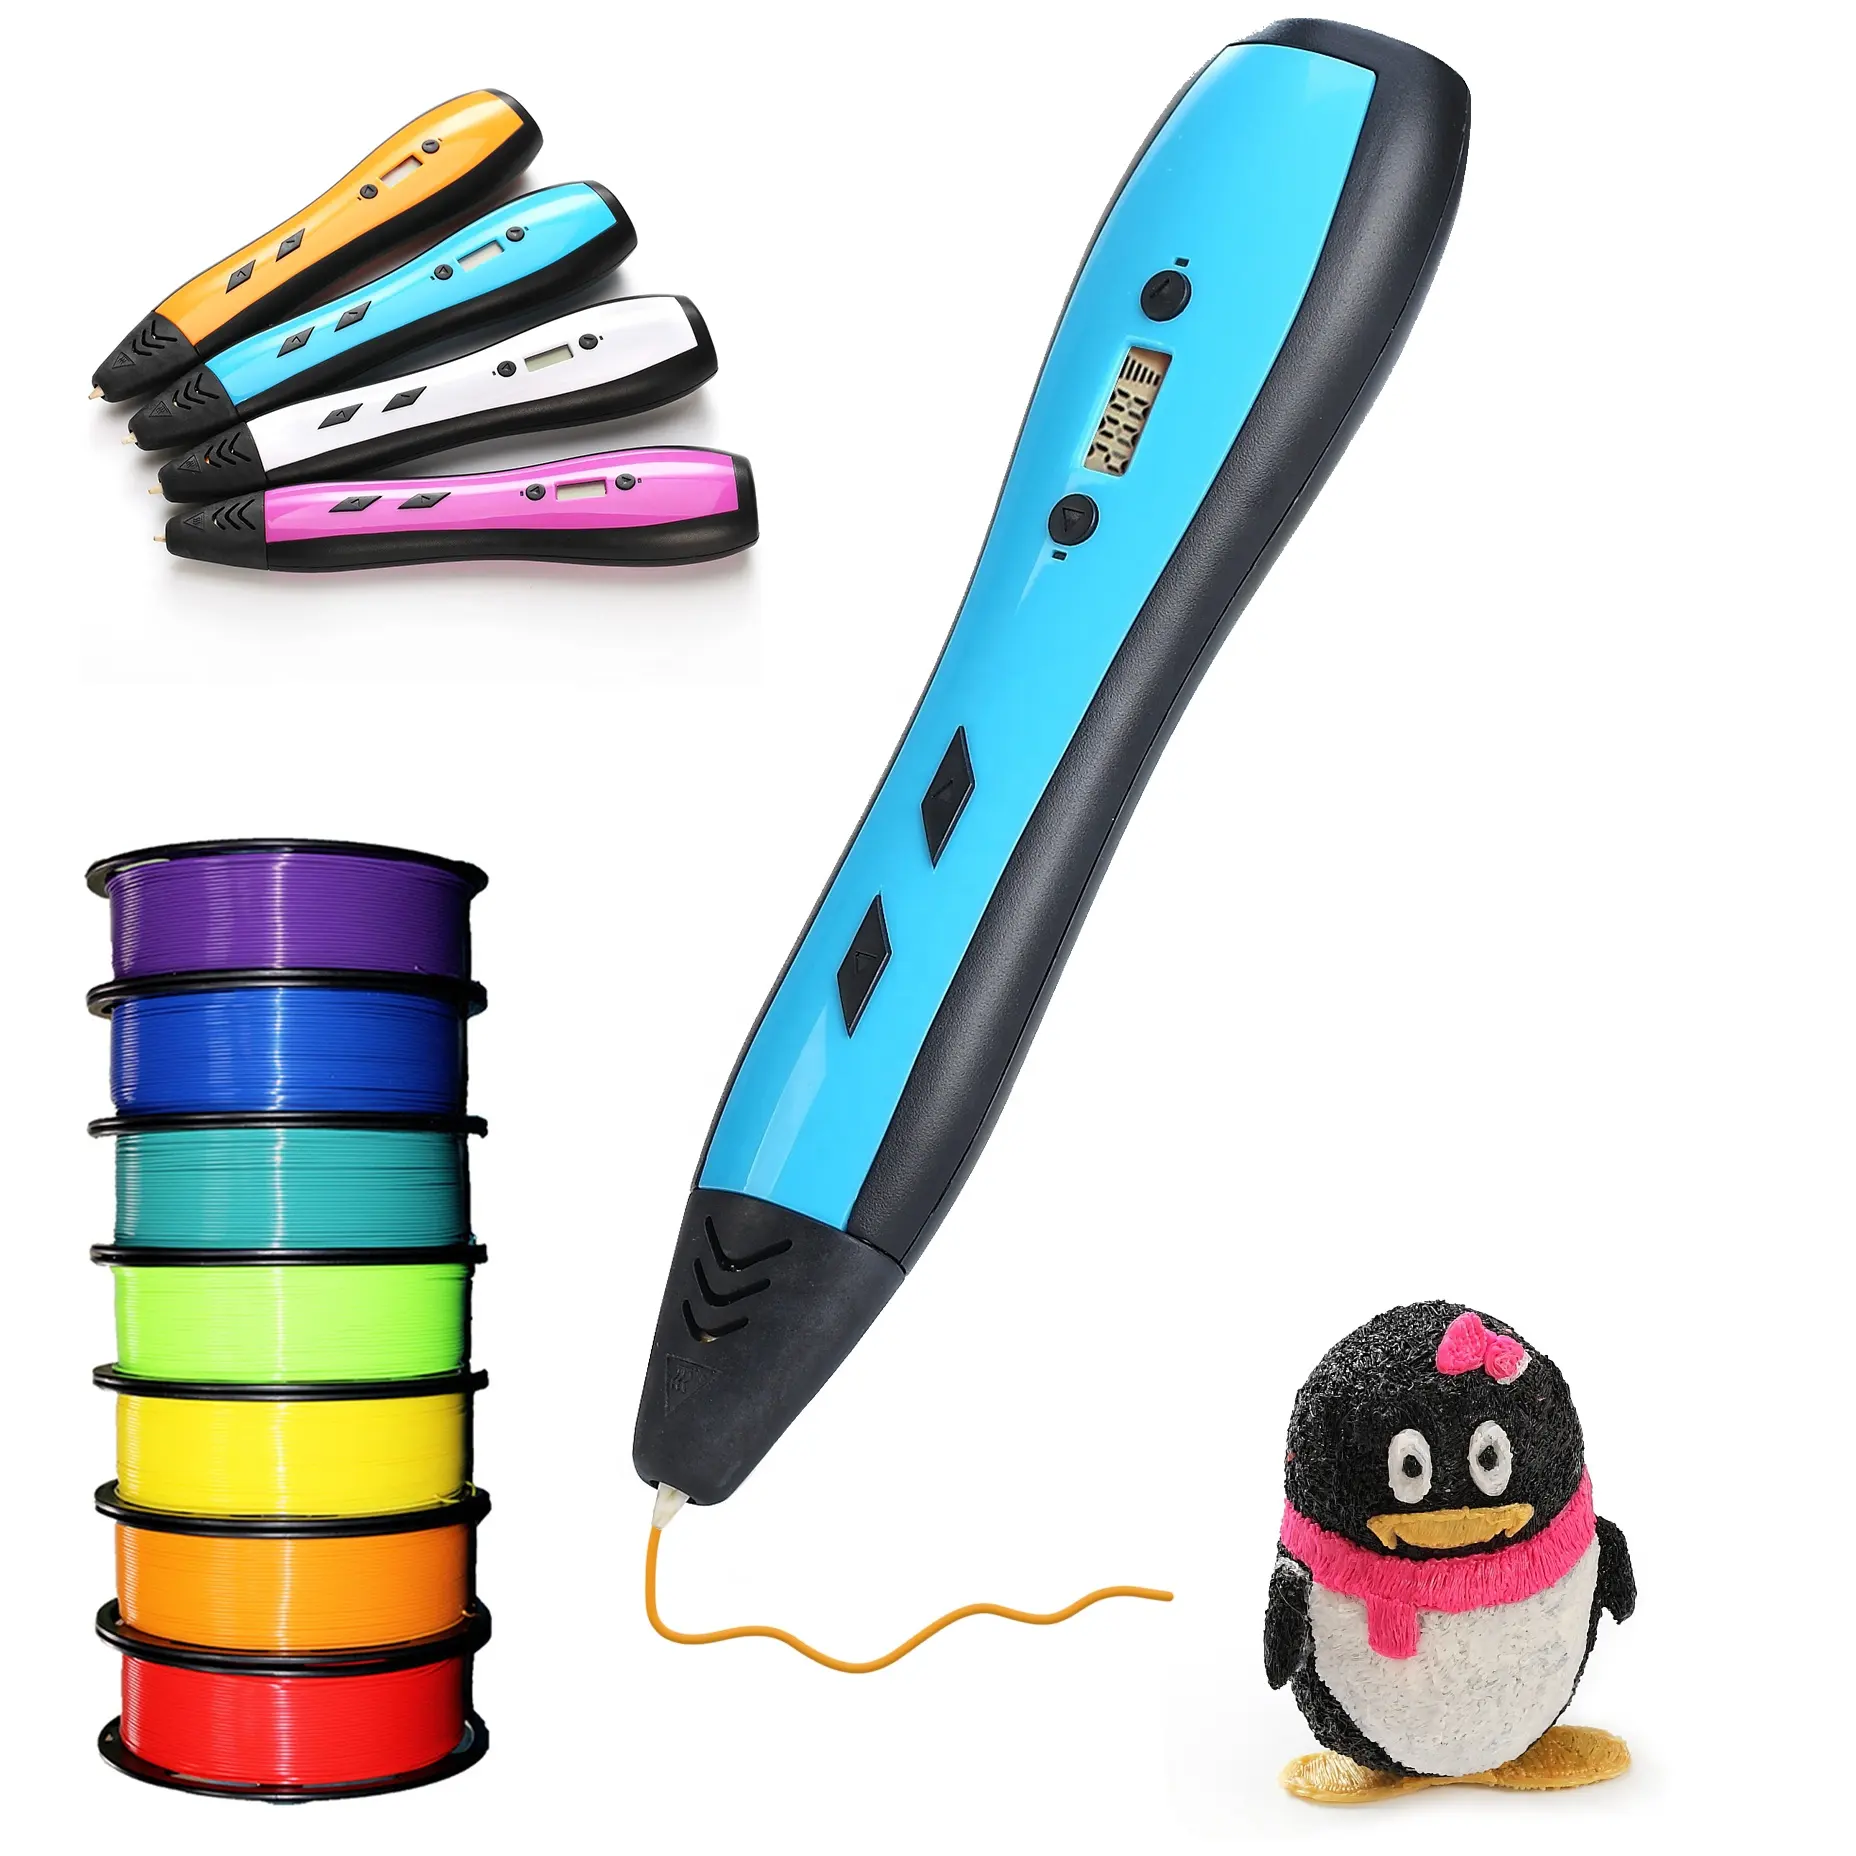 Jer education 3D Pen New Design with LCD Screen Best PLA ABS Filament 3D printer drawing writing Pen